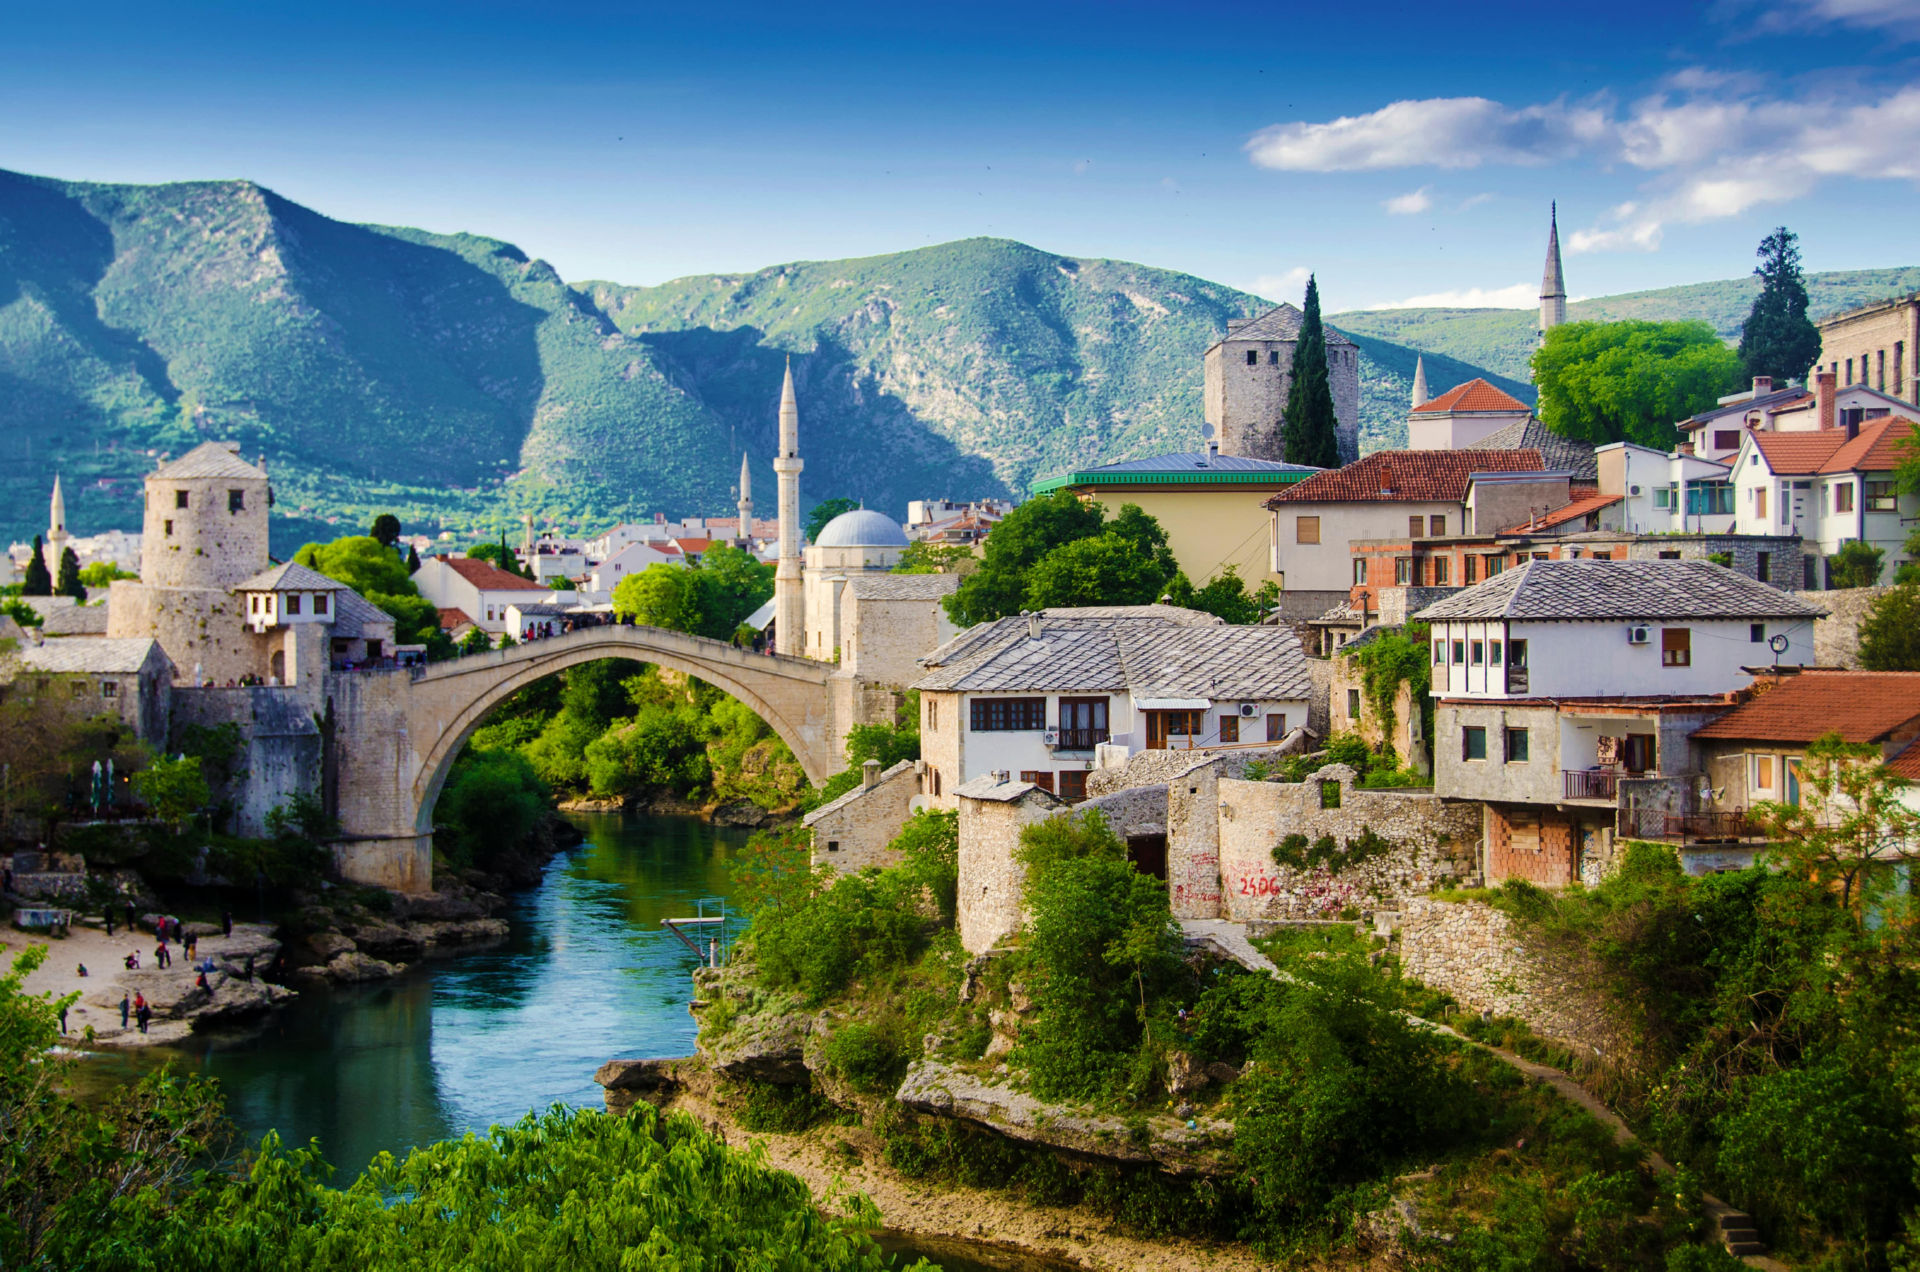 Mostar Airport Transfers. Mostar airport carriers